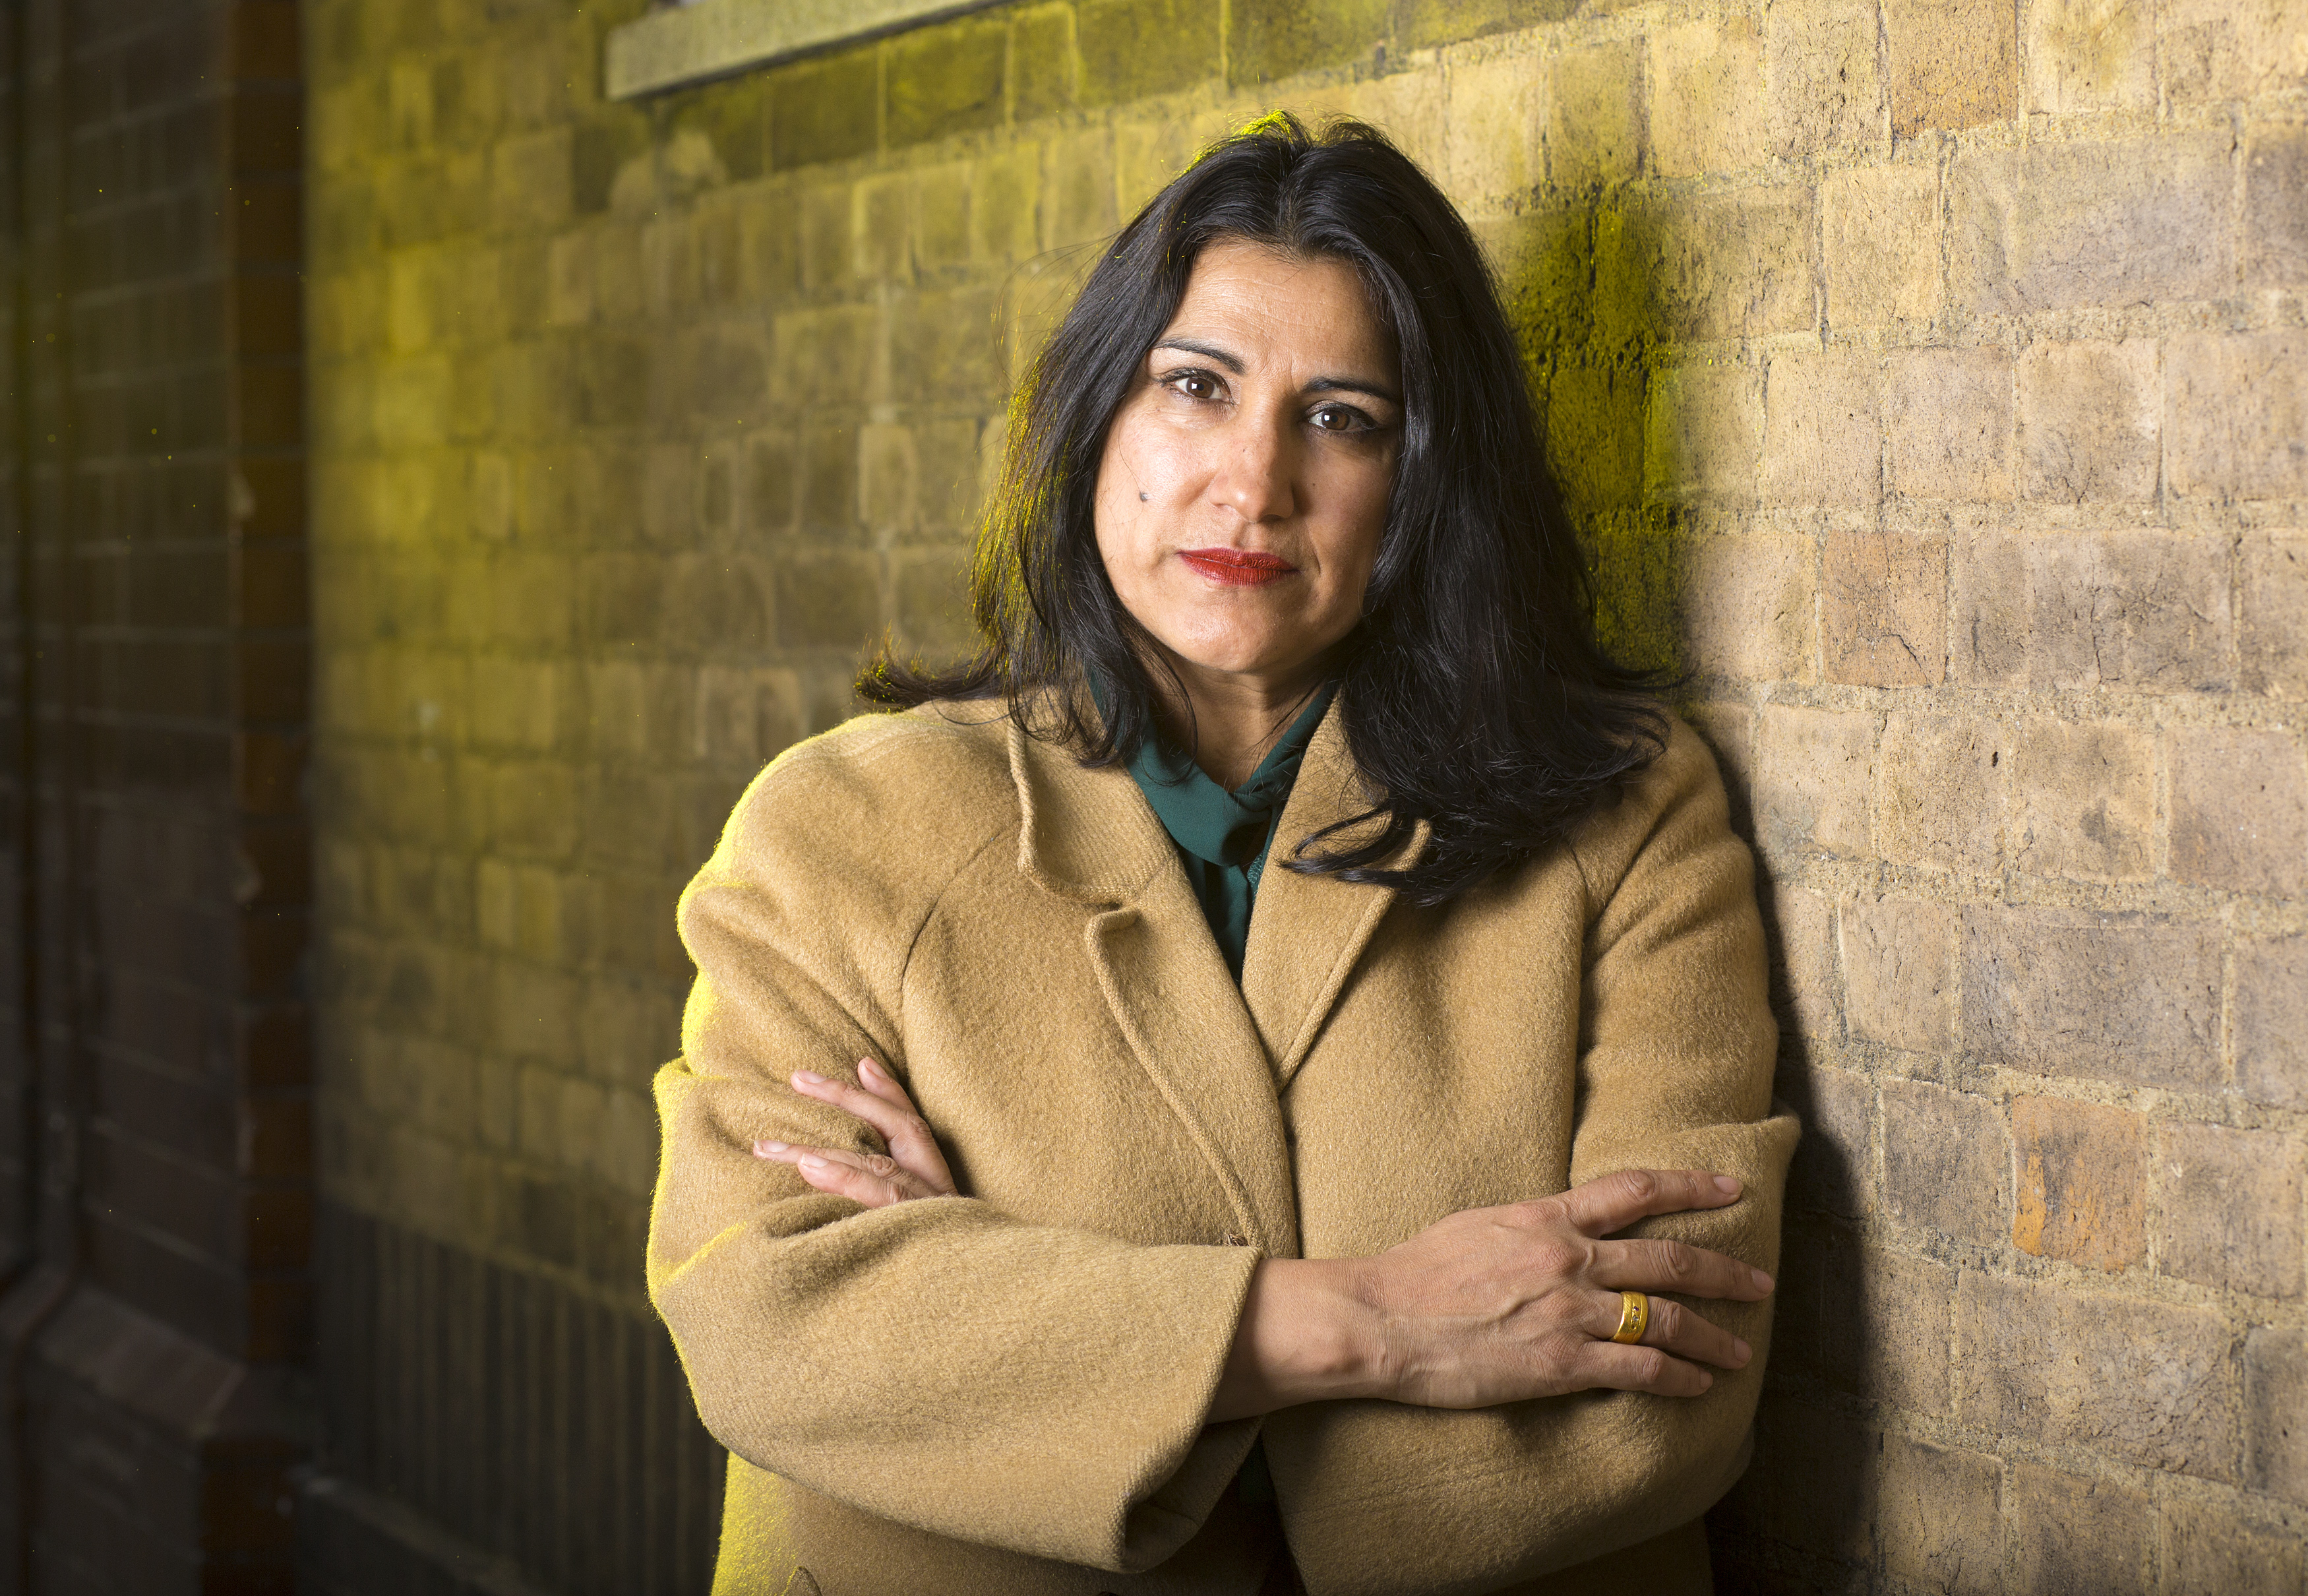 Dr Jasvinder Sanghera ran away to escape a forced marriage at the age of 15